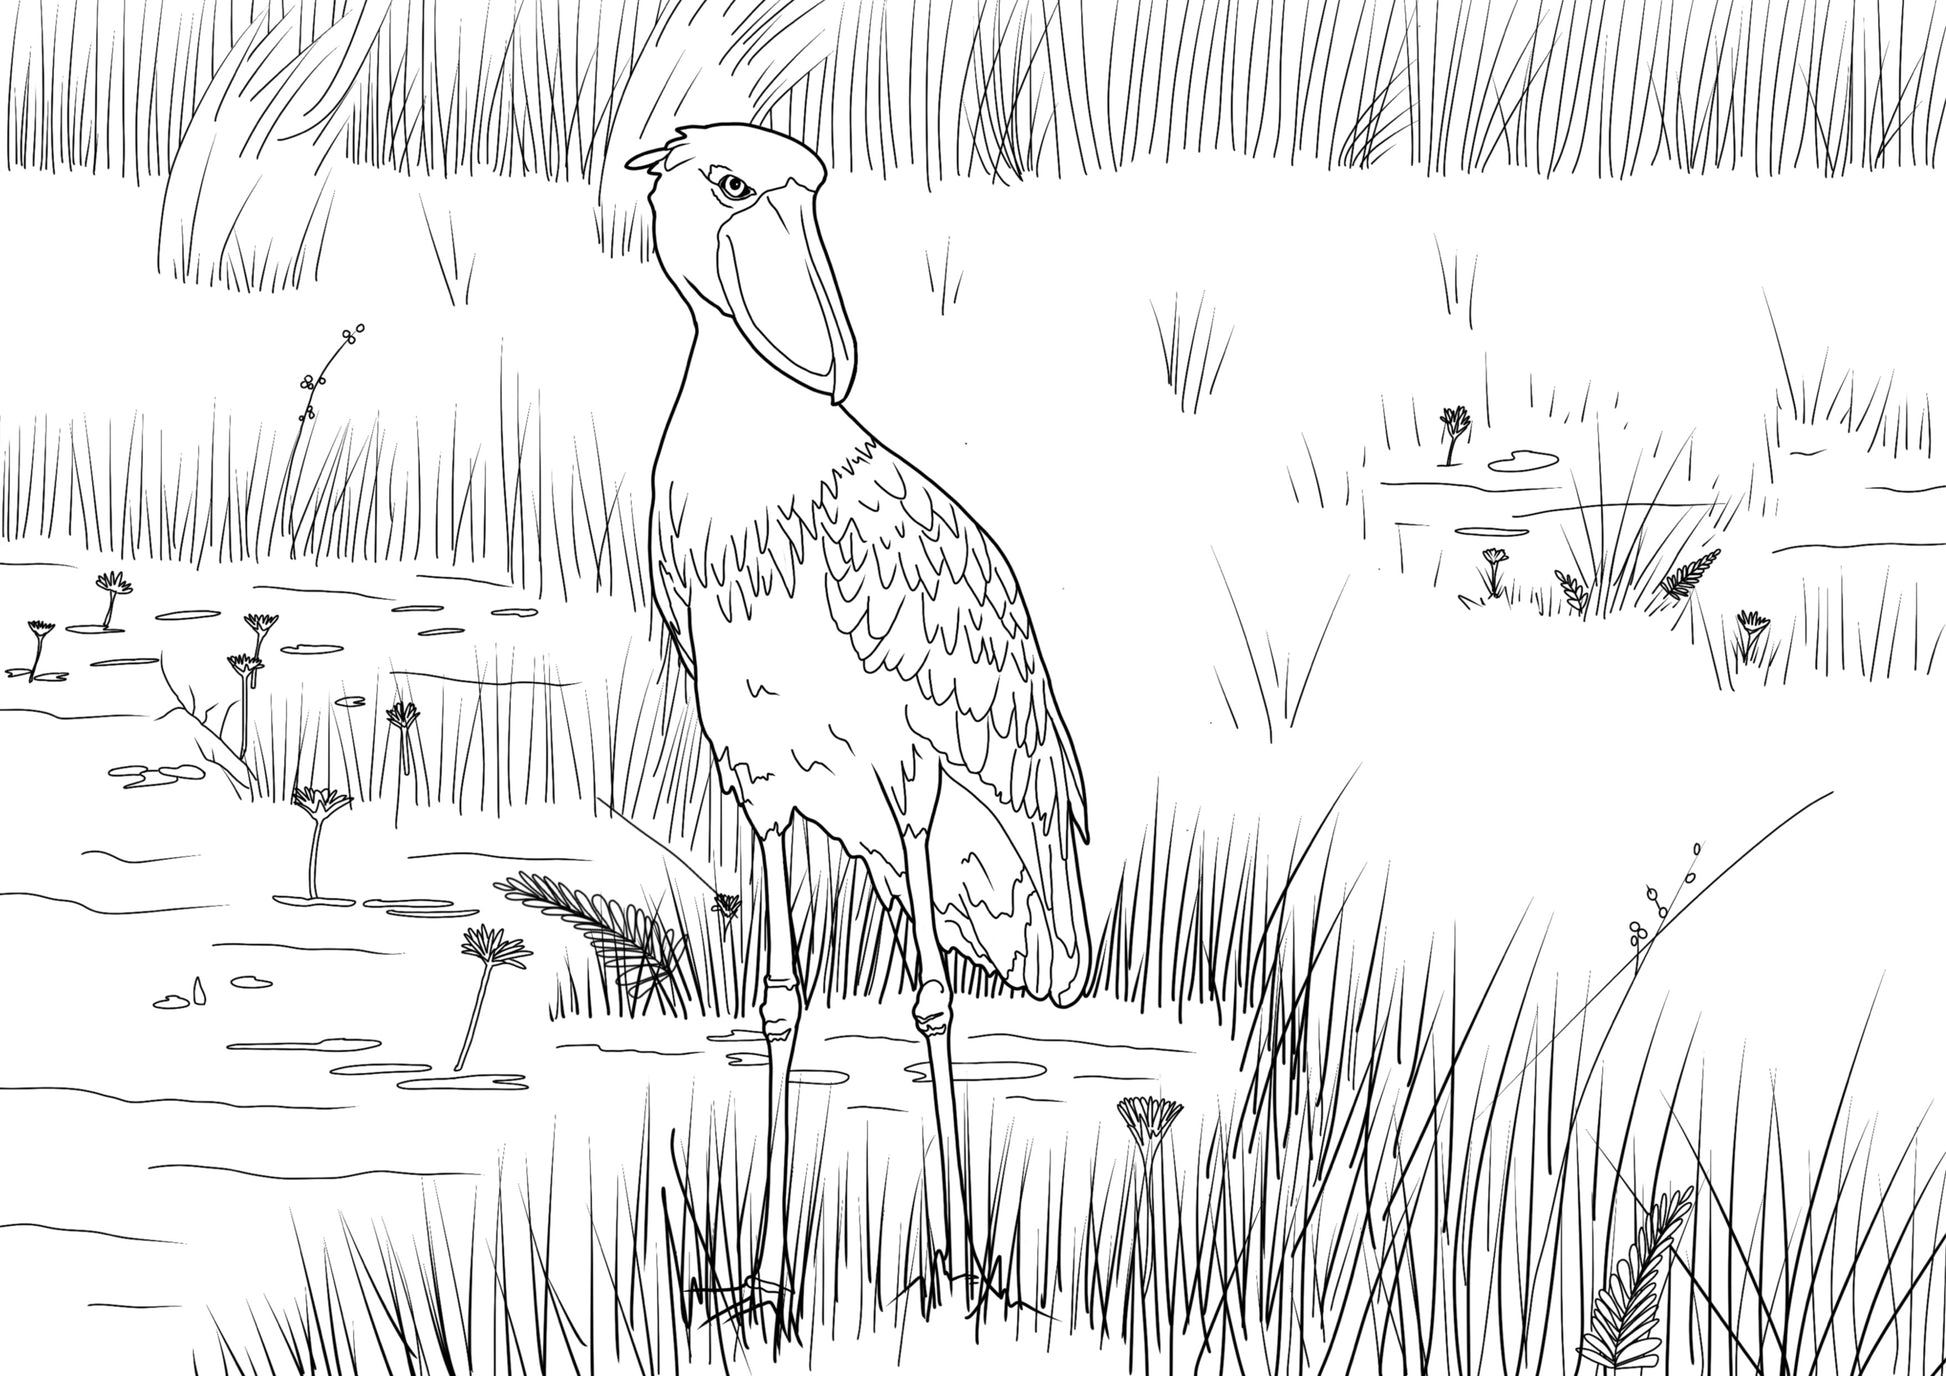 Line drawing of a shoebill stork wading through Mbambma swamp. The bird's head is turned sideways and a single eye glares intentently.